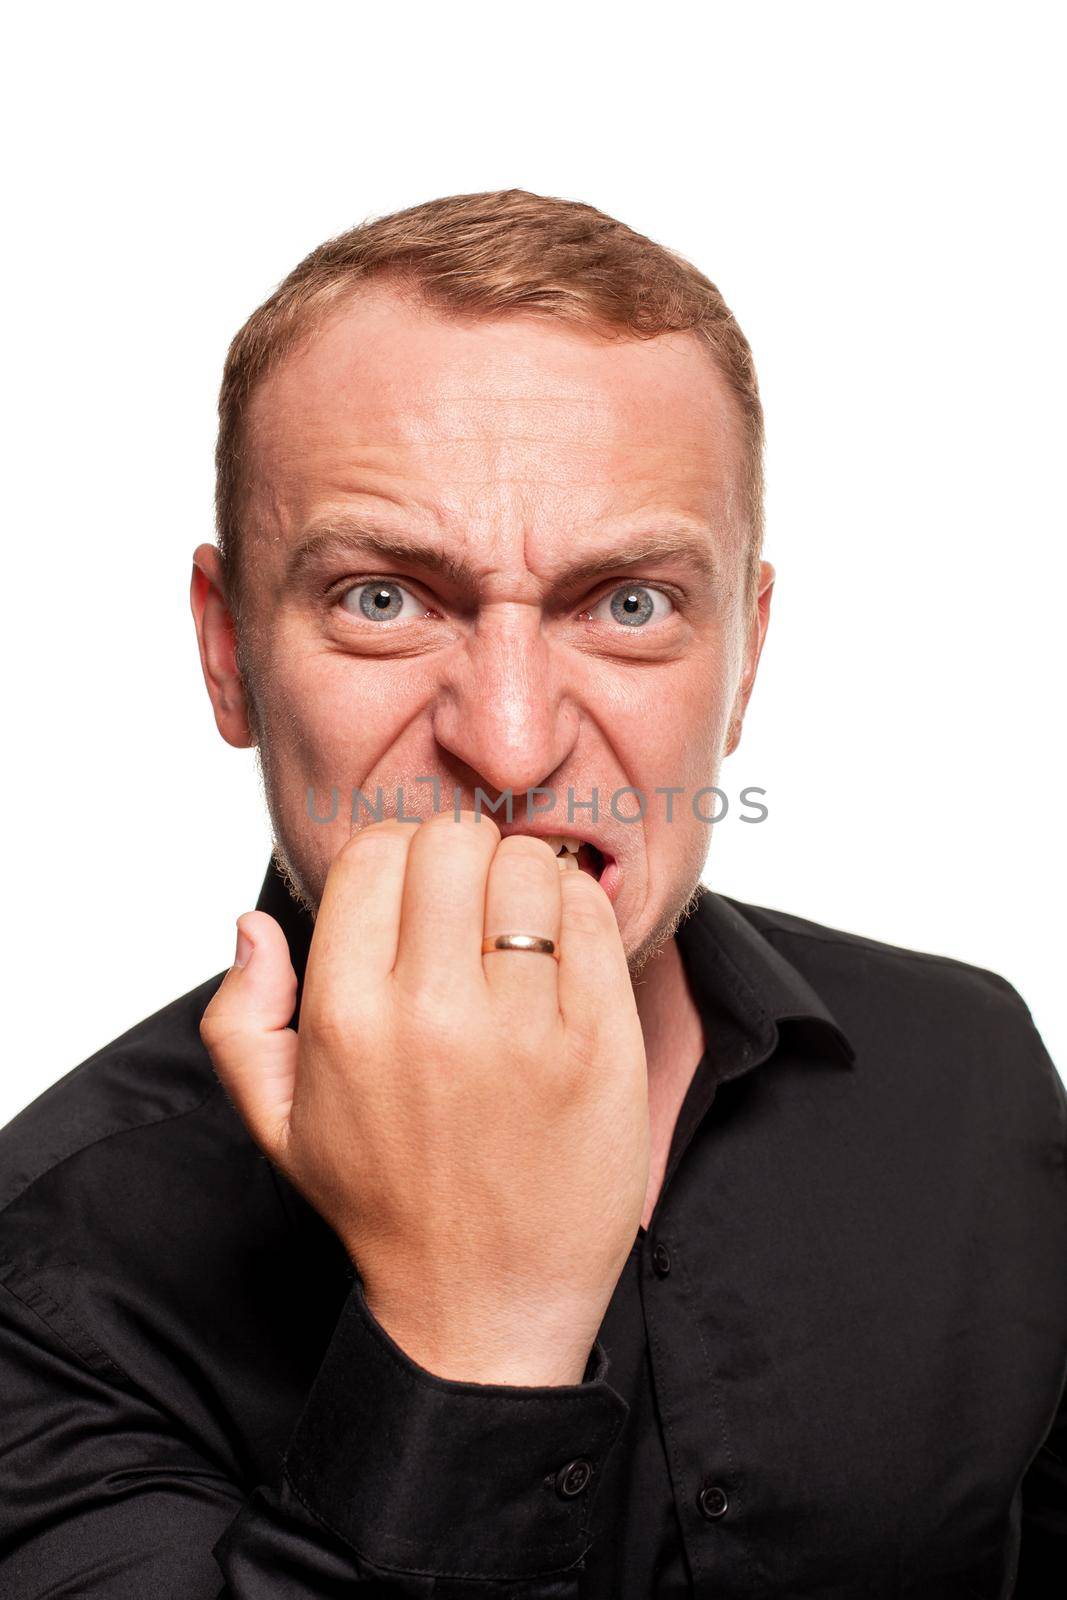 Handsome young blond man in a black shirt is making faces and act like he is biting his nails, isolated on a white background